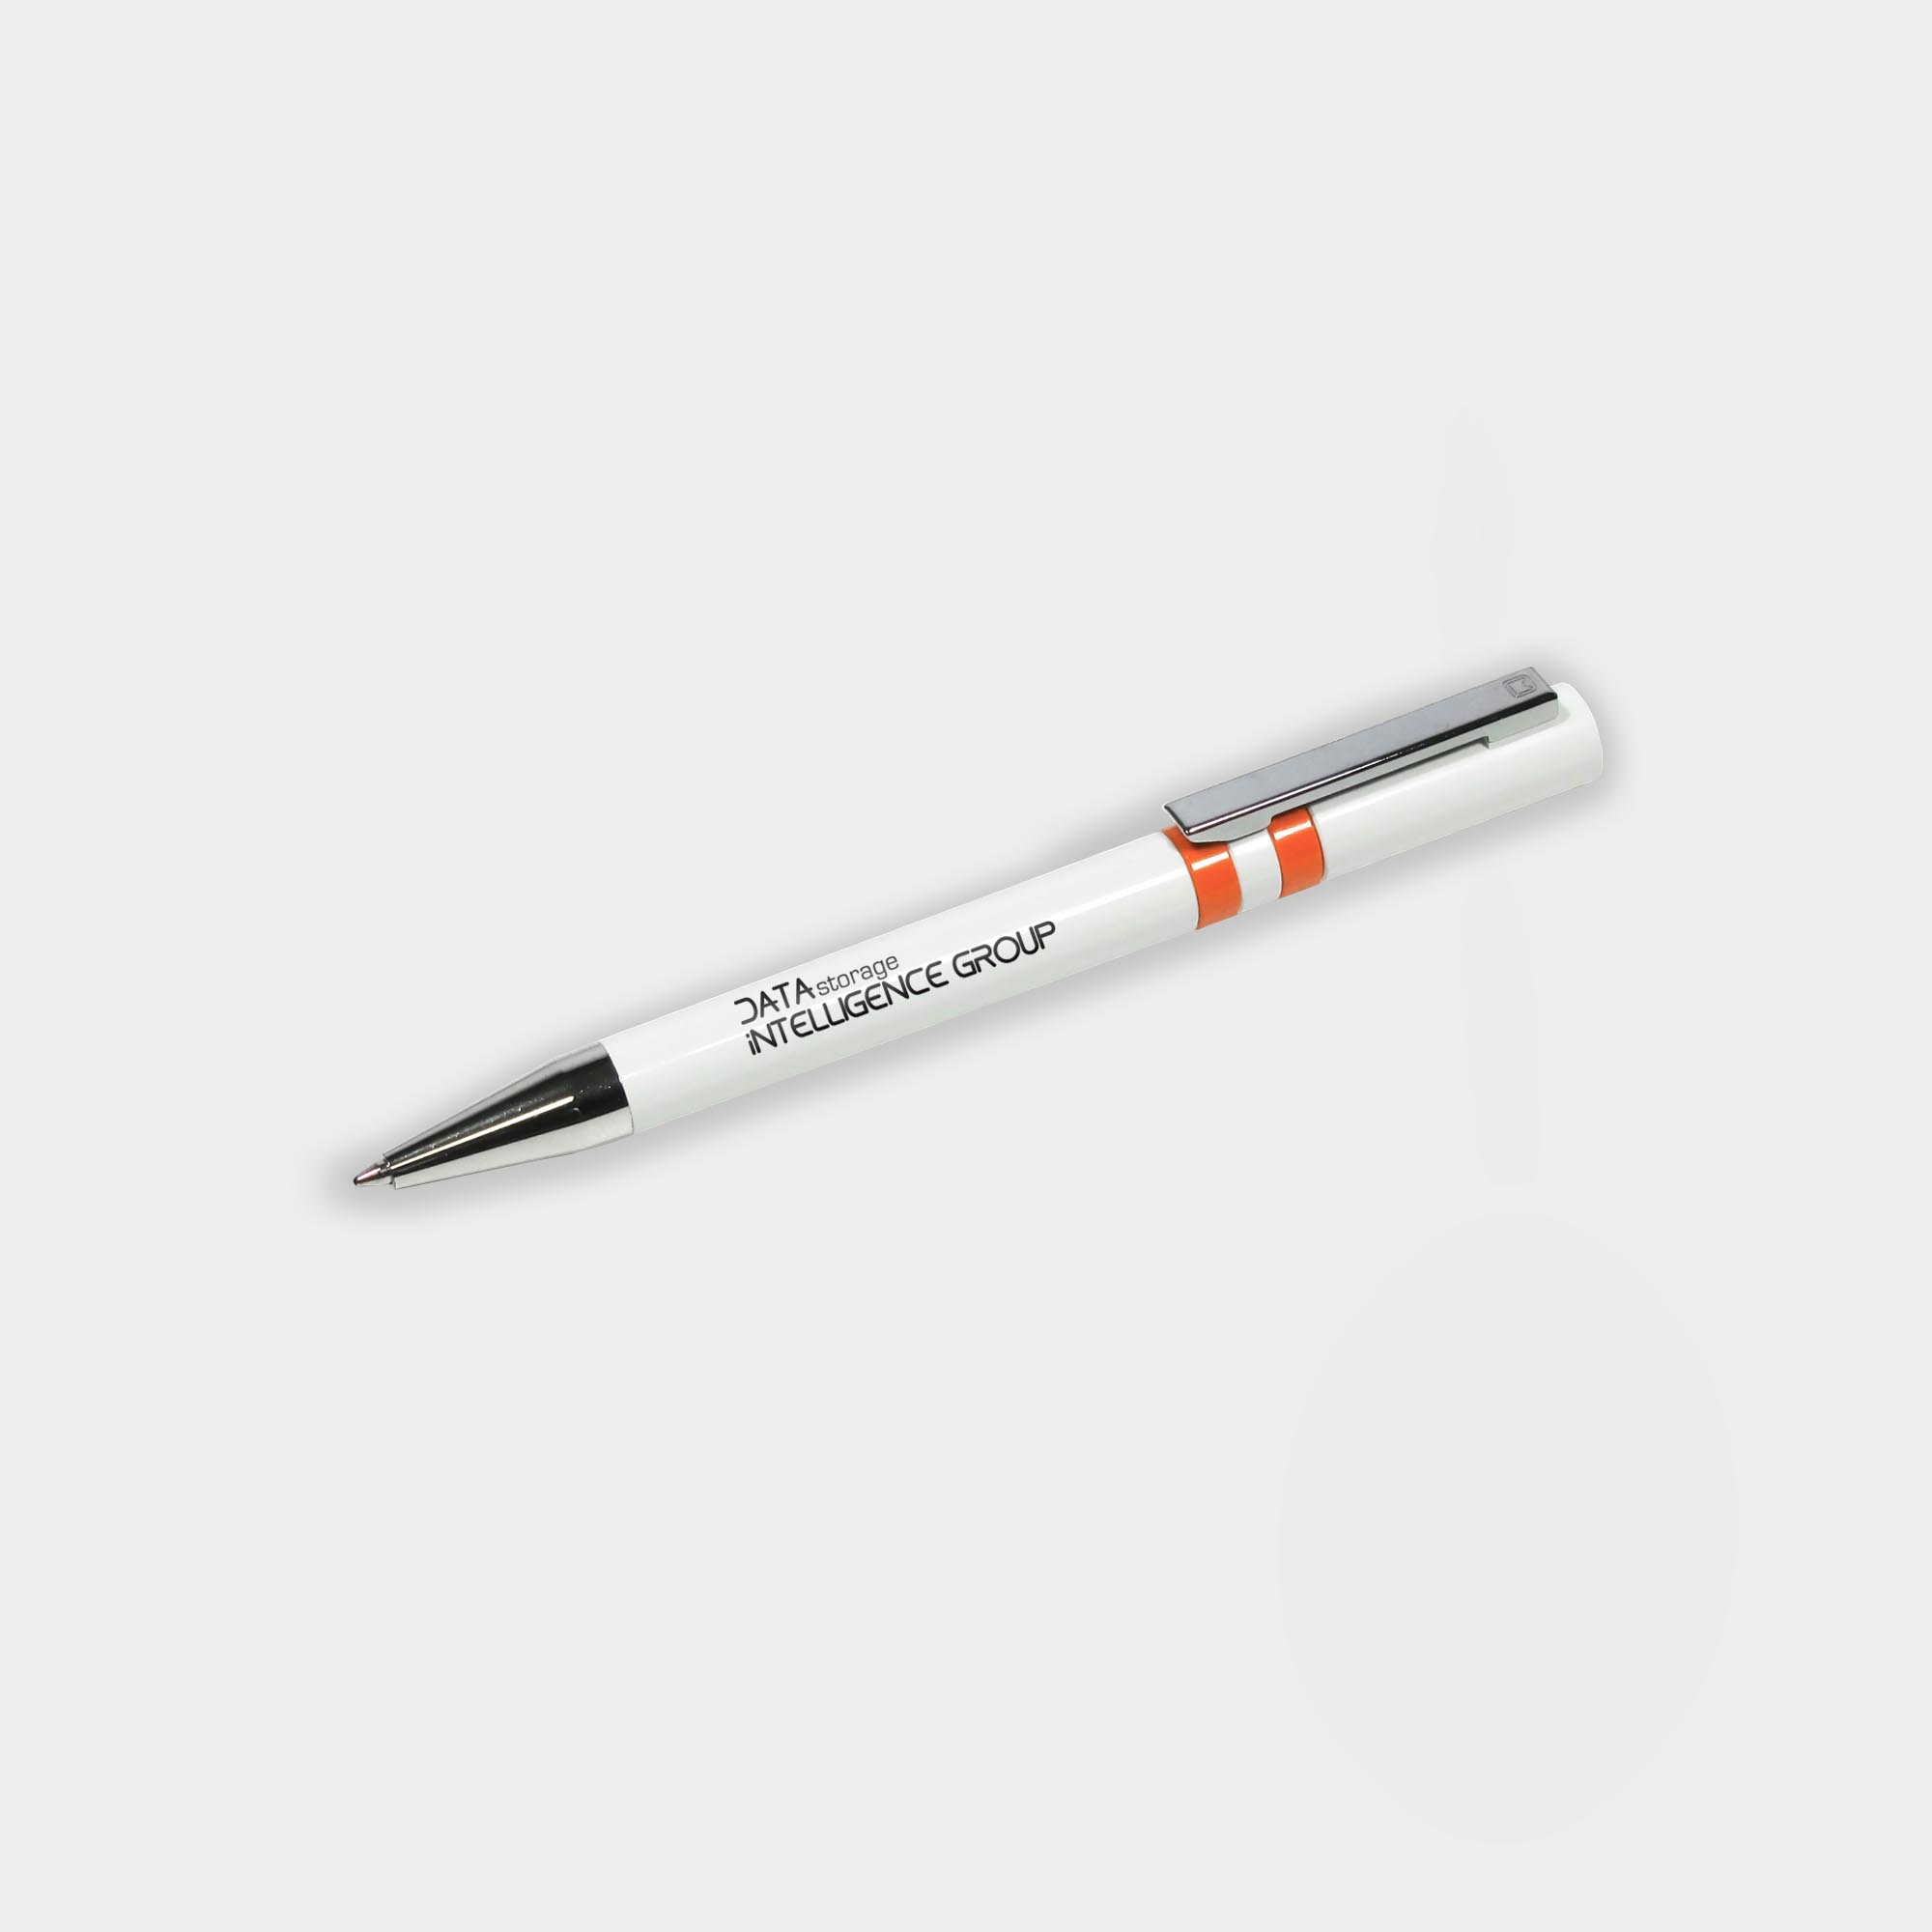 The Green & Good Ethic Pen made from recycled plastic. Stylish executive pen with chrome tip and various colour upon request. Black ink as standard. White / Orange